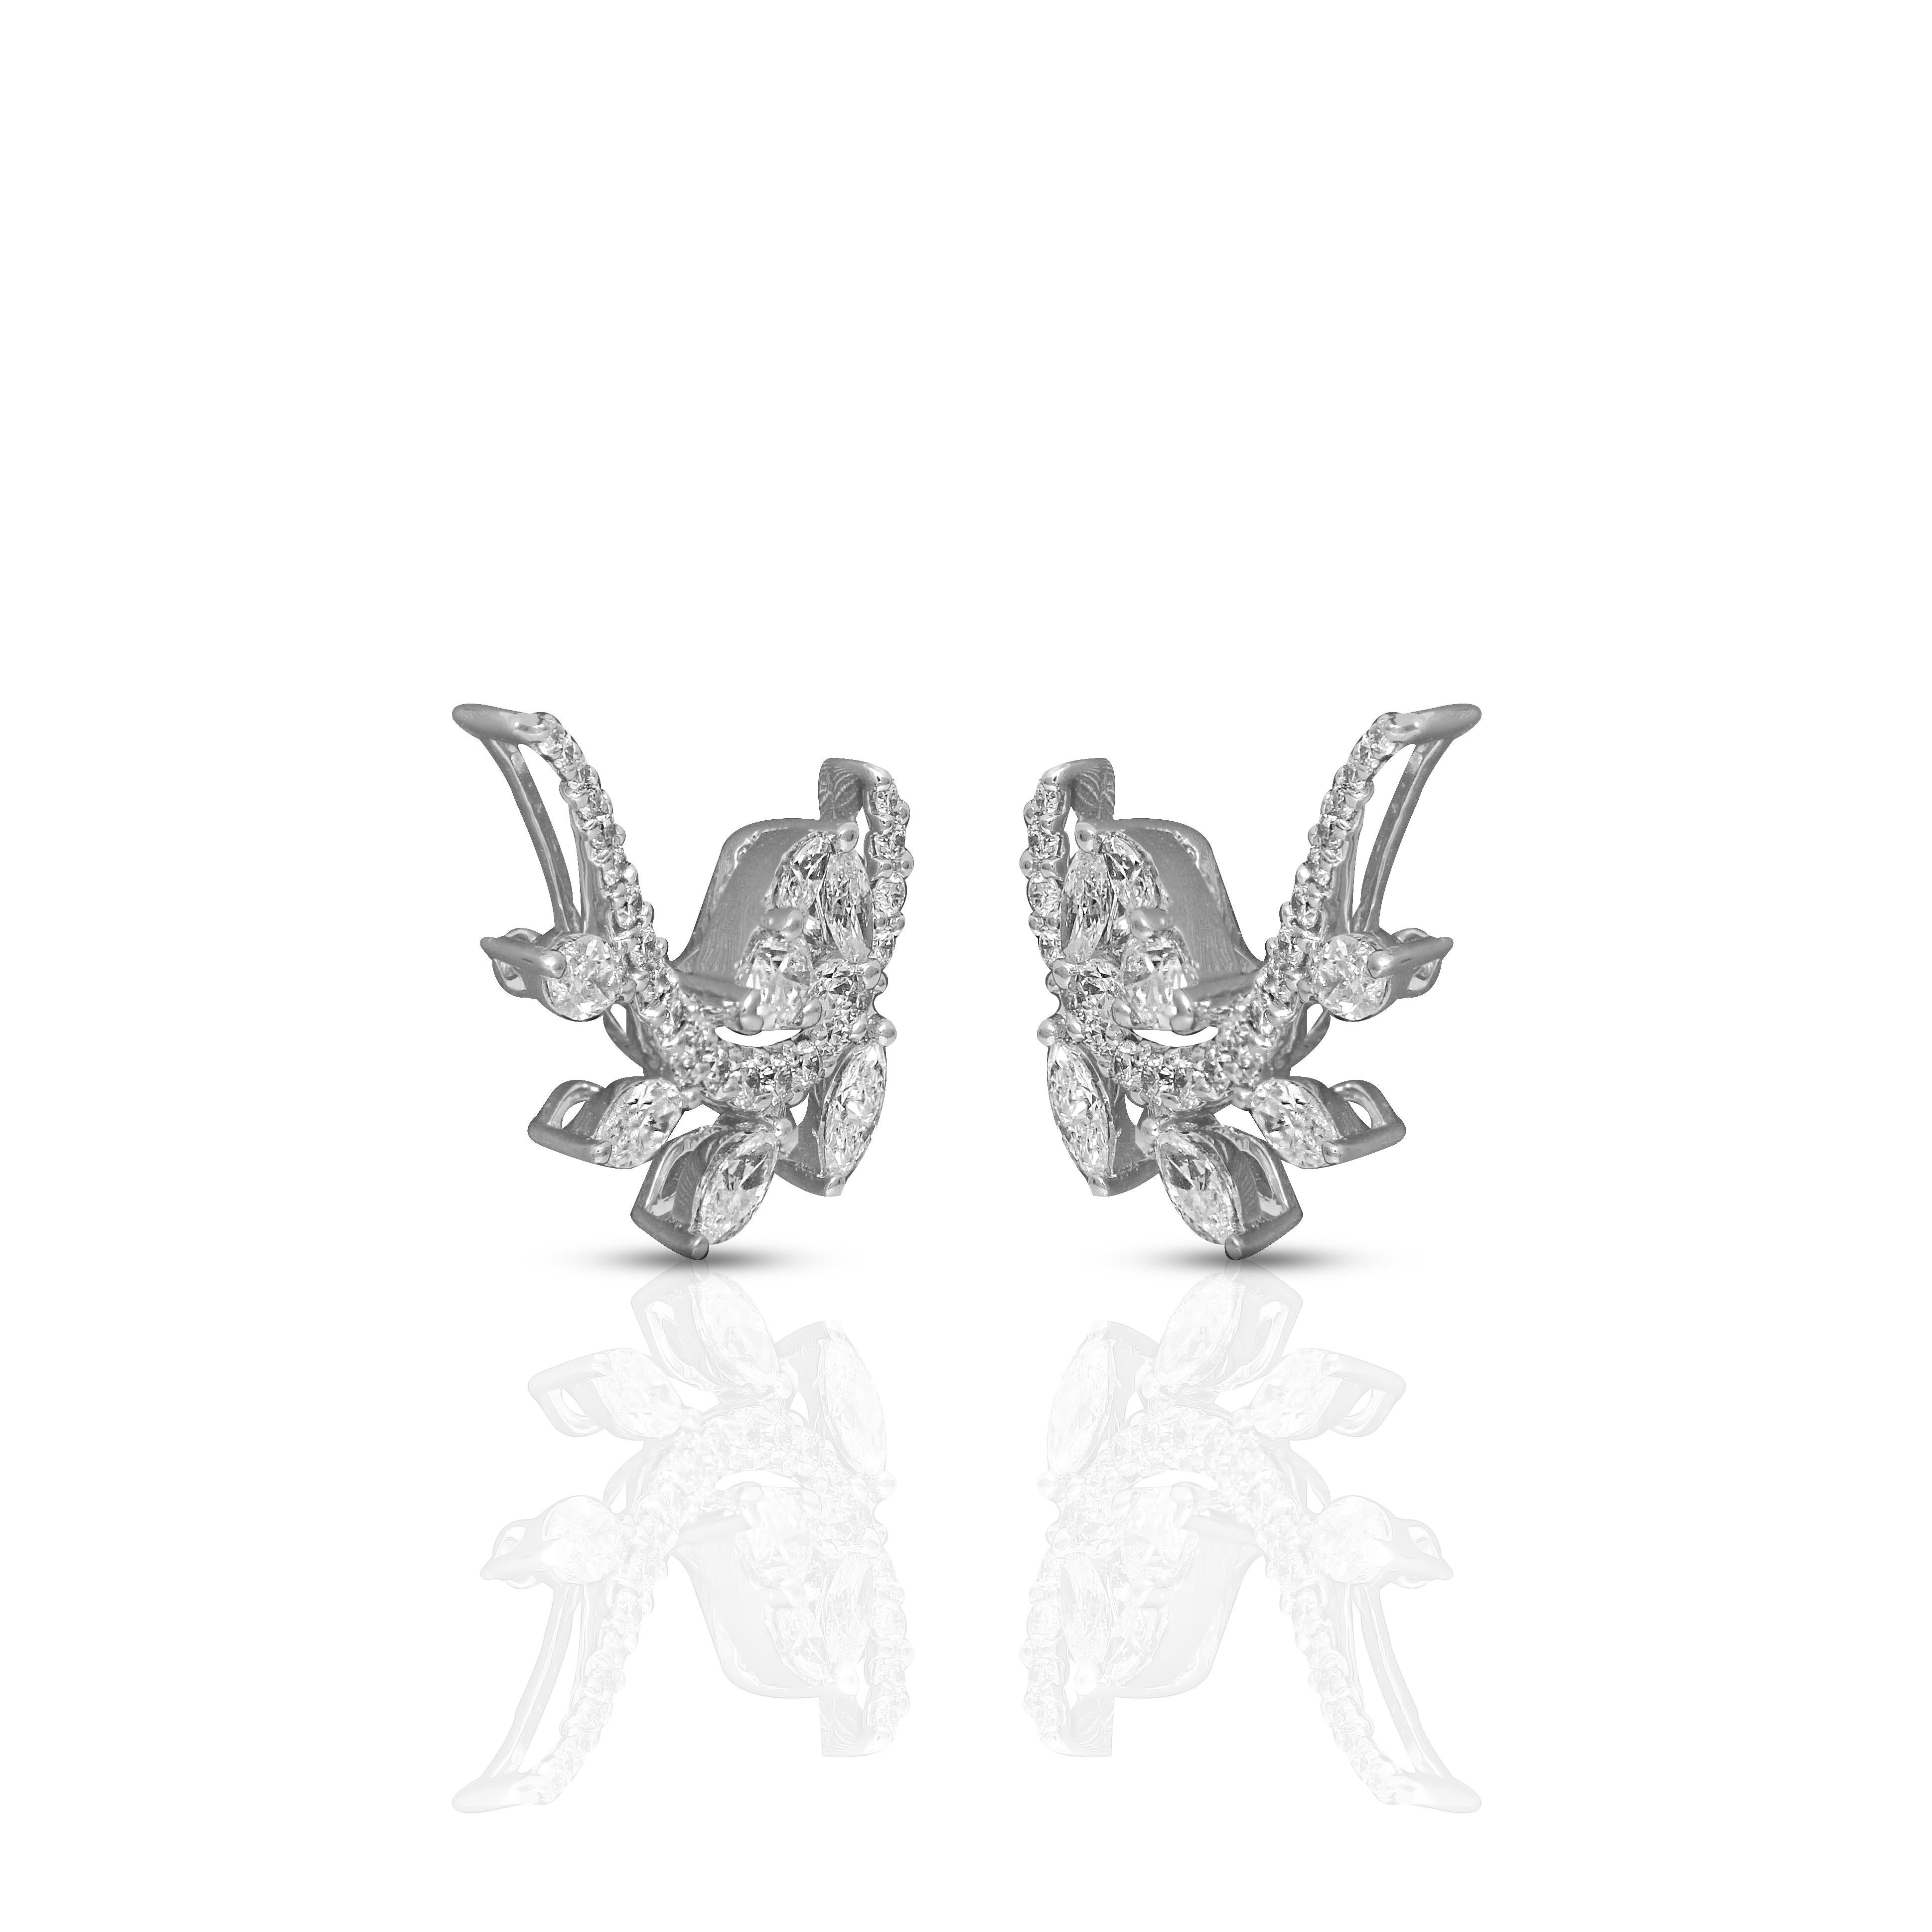 A creative arrangement of pear shape, marquise, and round cut diamonds set in 18 karat white gold that creates an imaginative motif for these earrings. Each diamond is set individually by hand within a minimal metal setting to allow its sparkle to